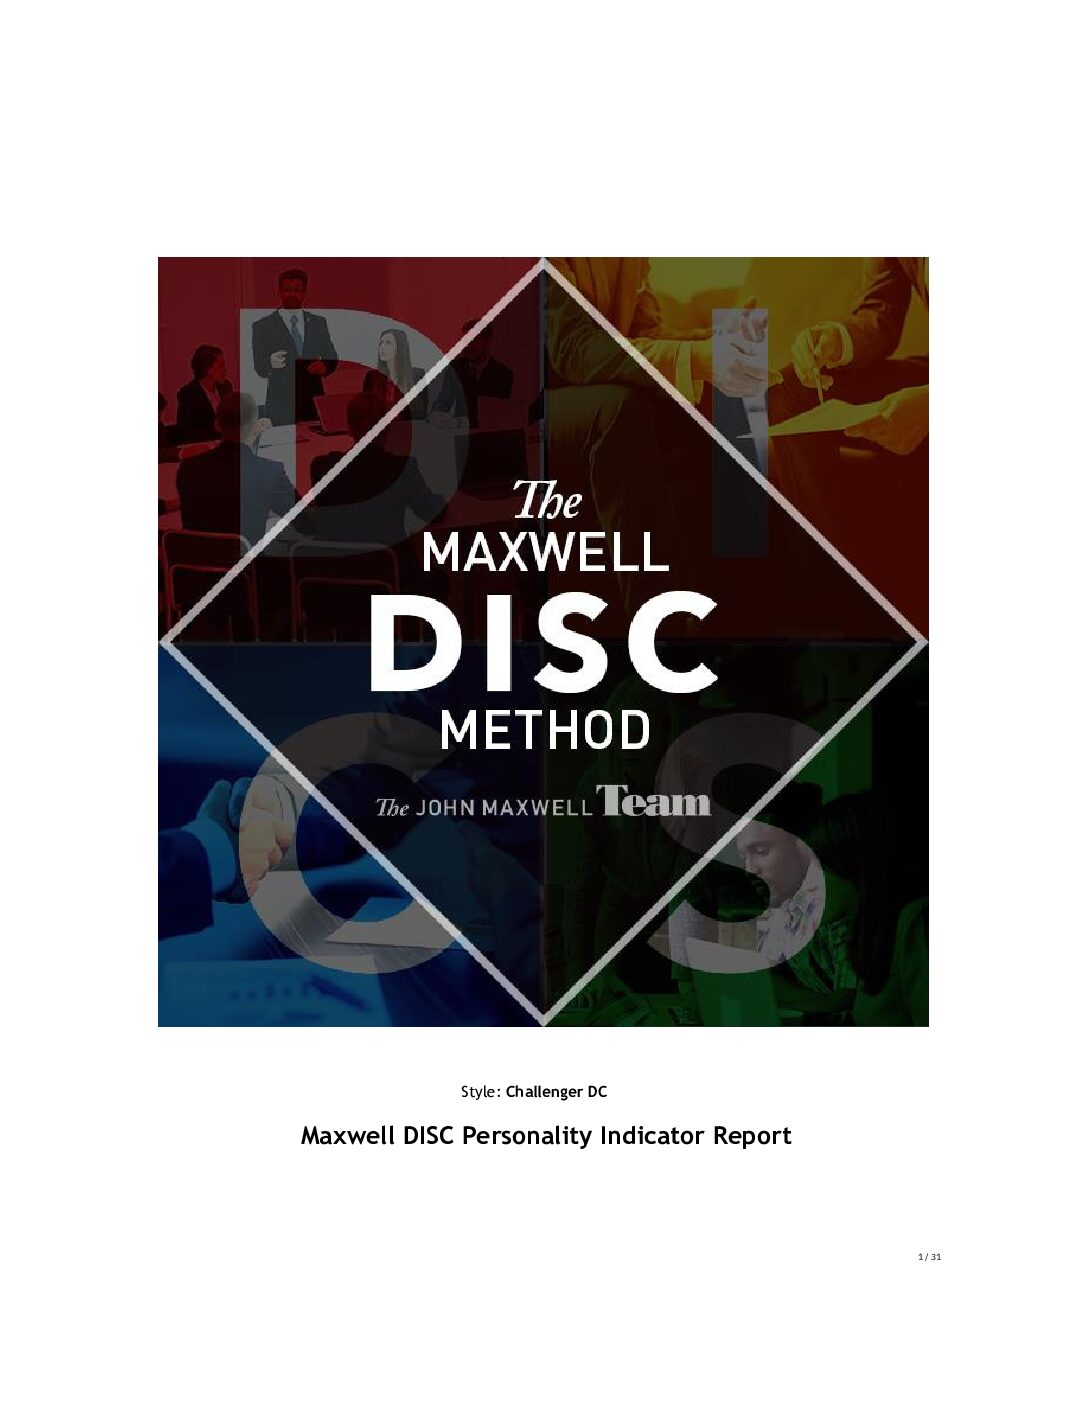 The maxwell disc method